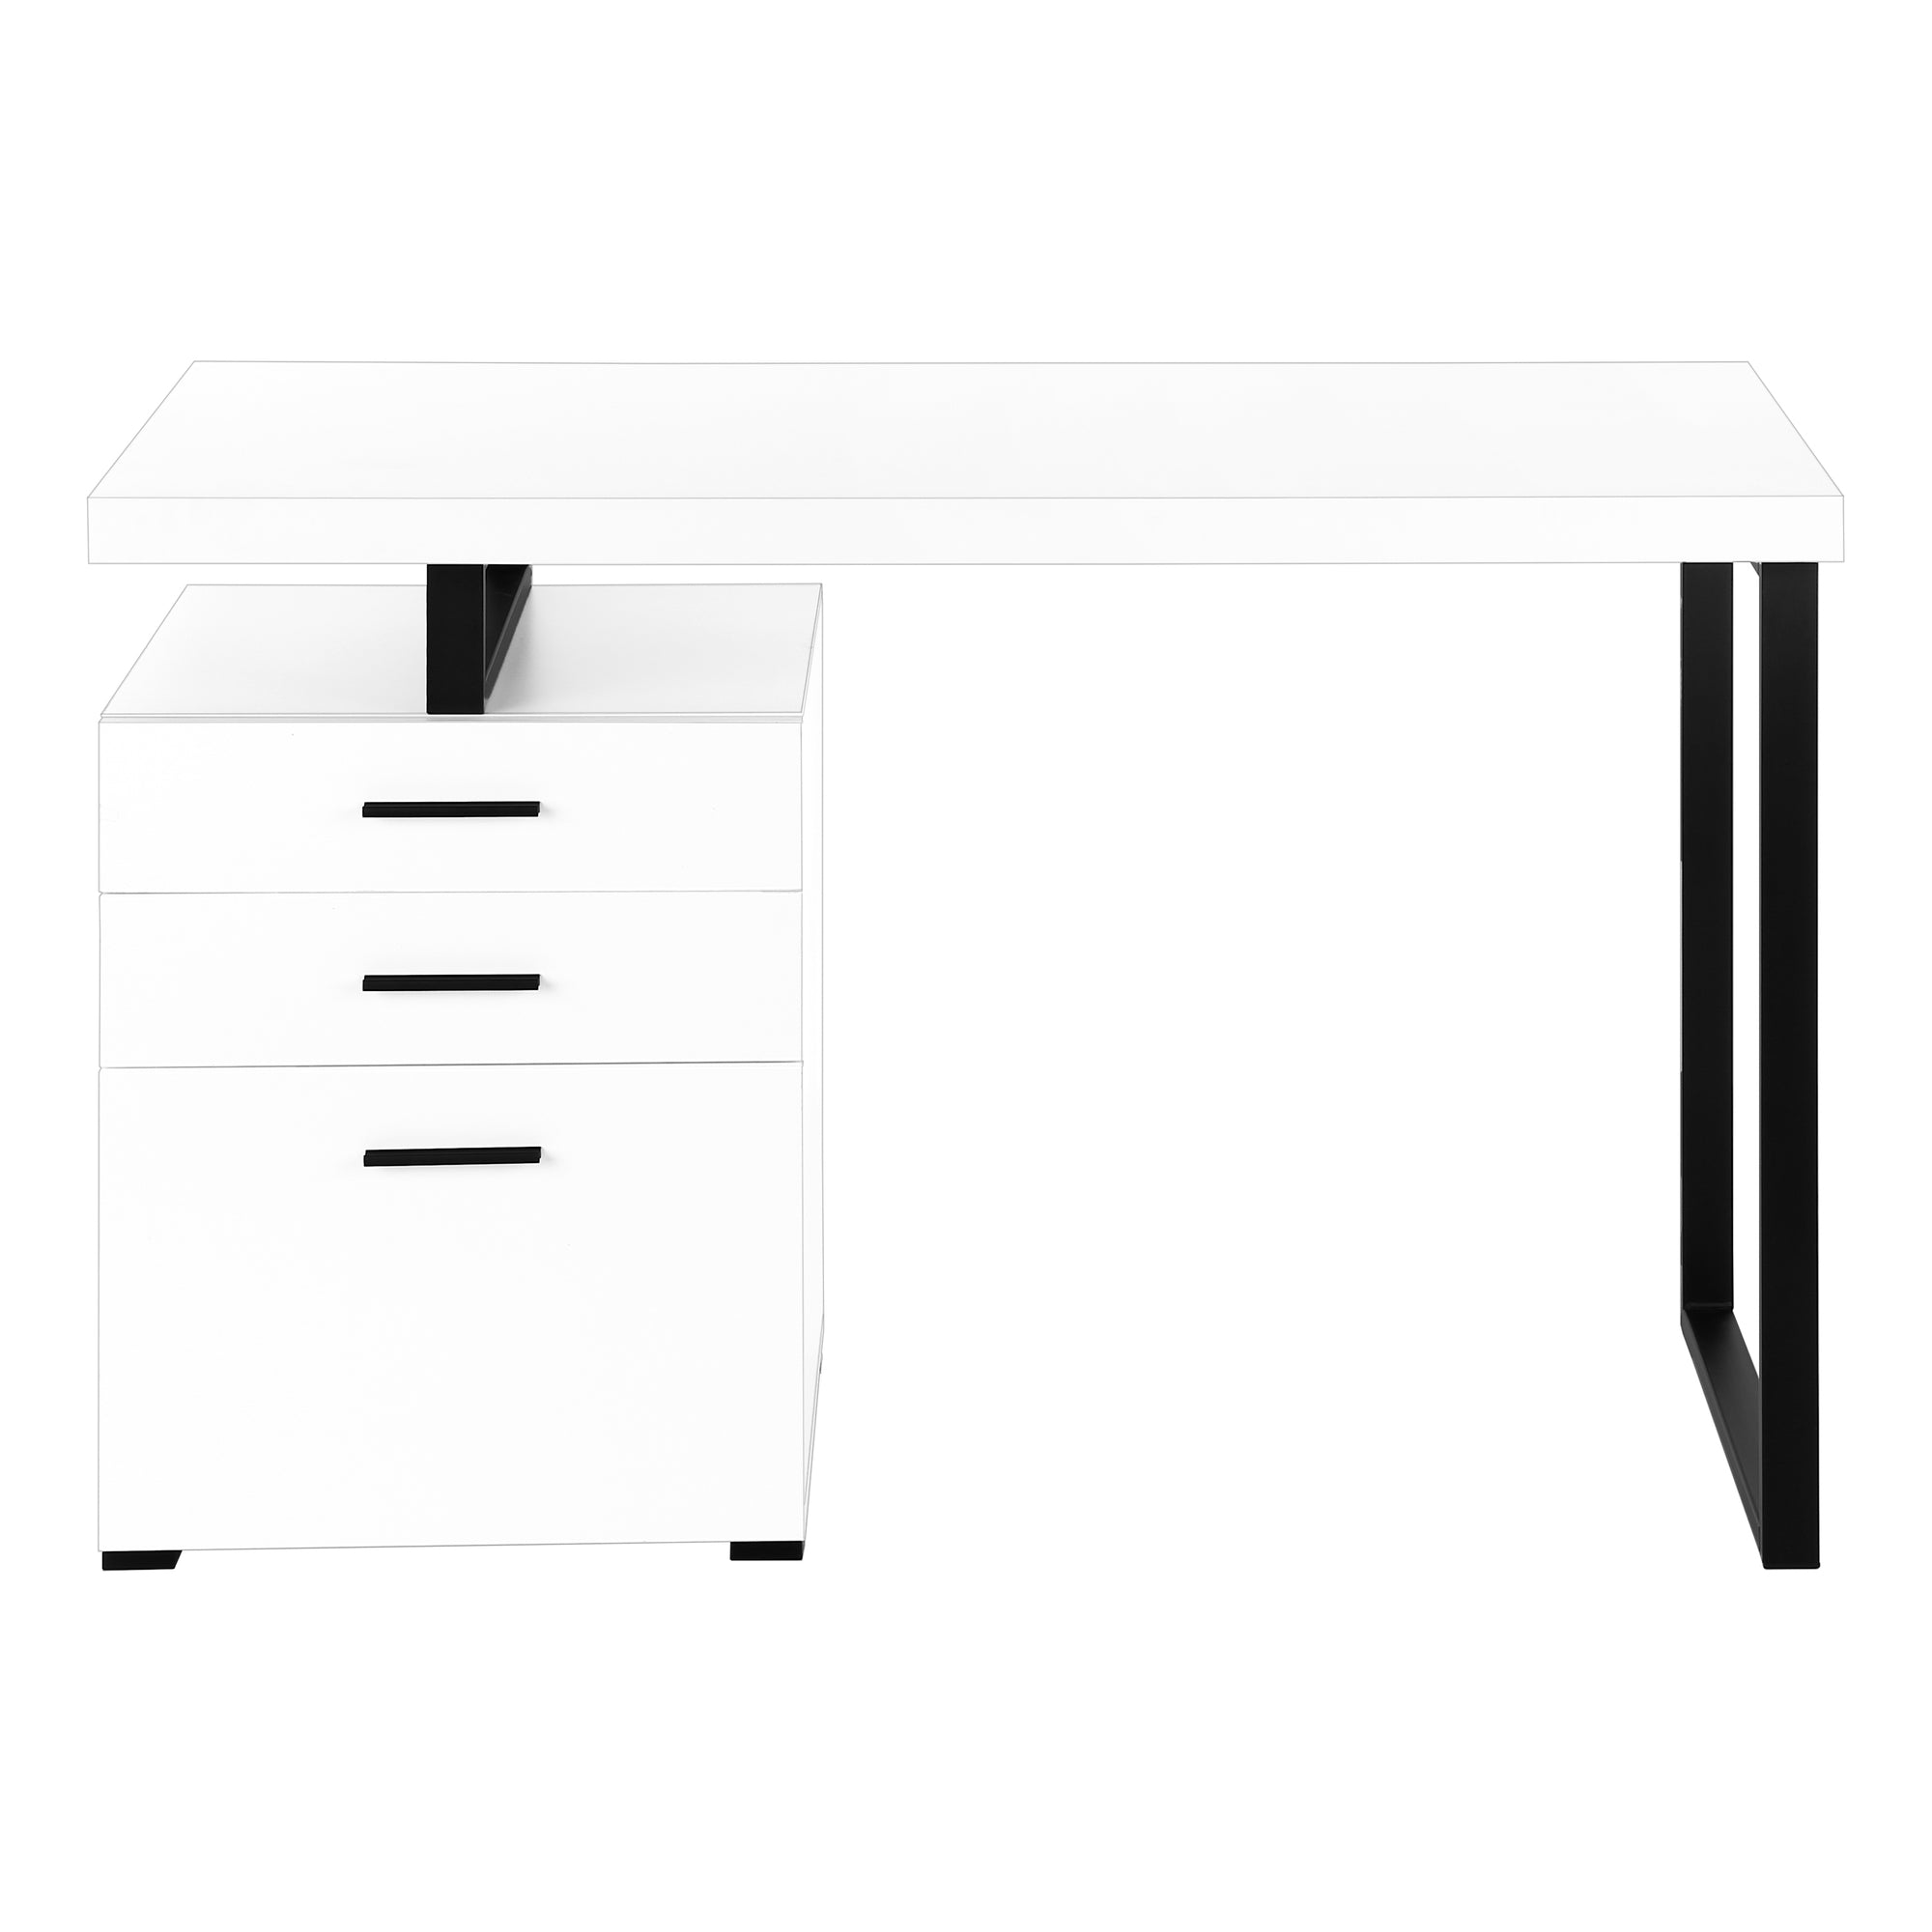 MN-527646    Computer Desk, Home Office, Laptop, Left, Right Set-Up, Storage Drawers, 48"L, Metal, Laminate, White, Black Metal, Contemporary, Modern